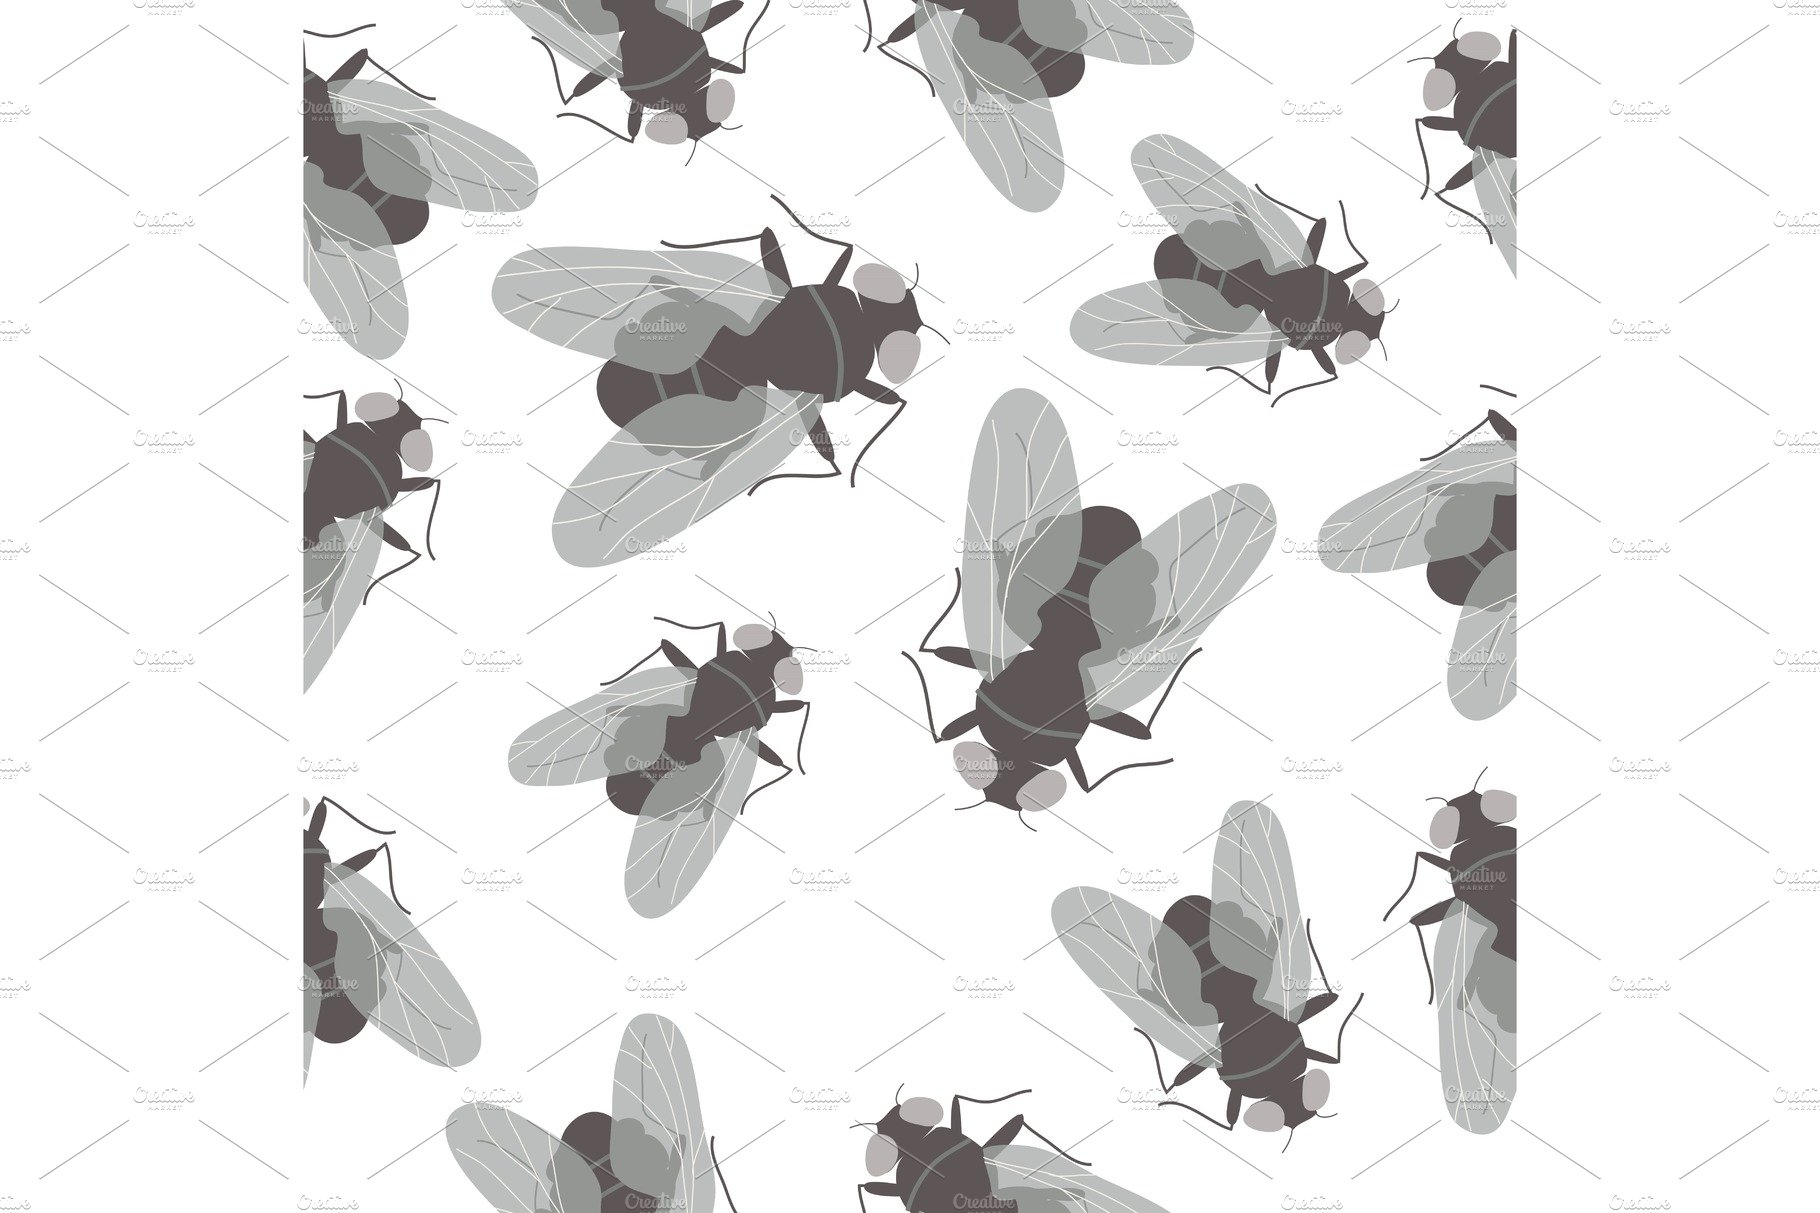 Seamless pattern with flies on white cover image.